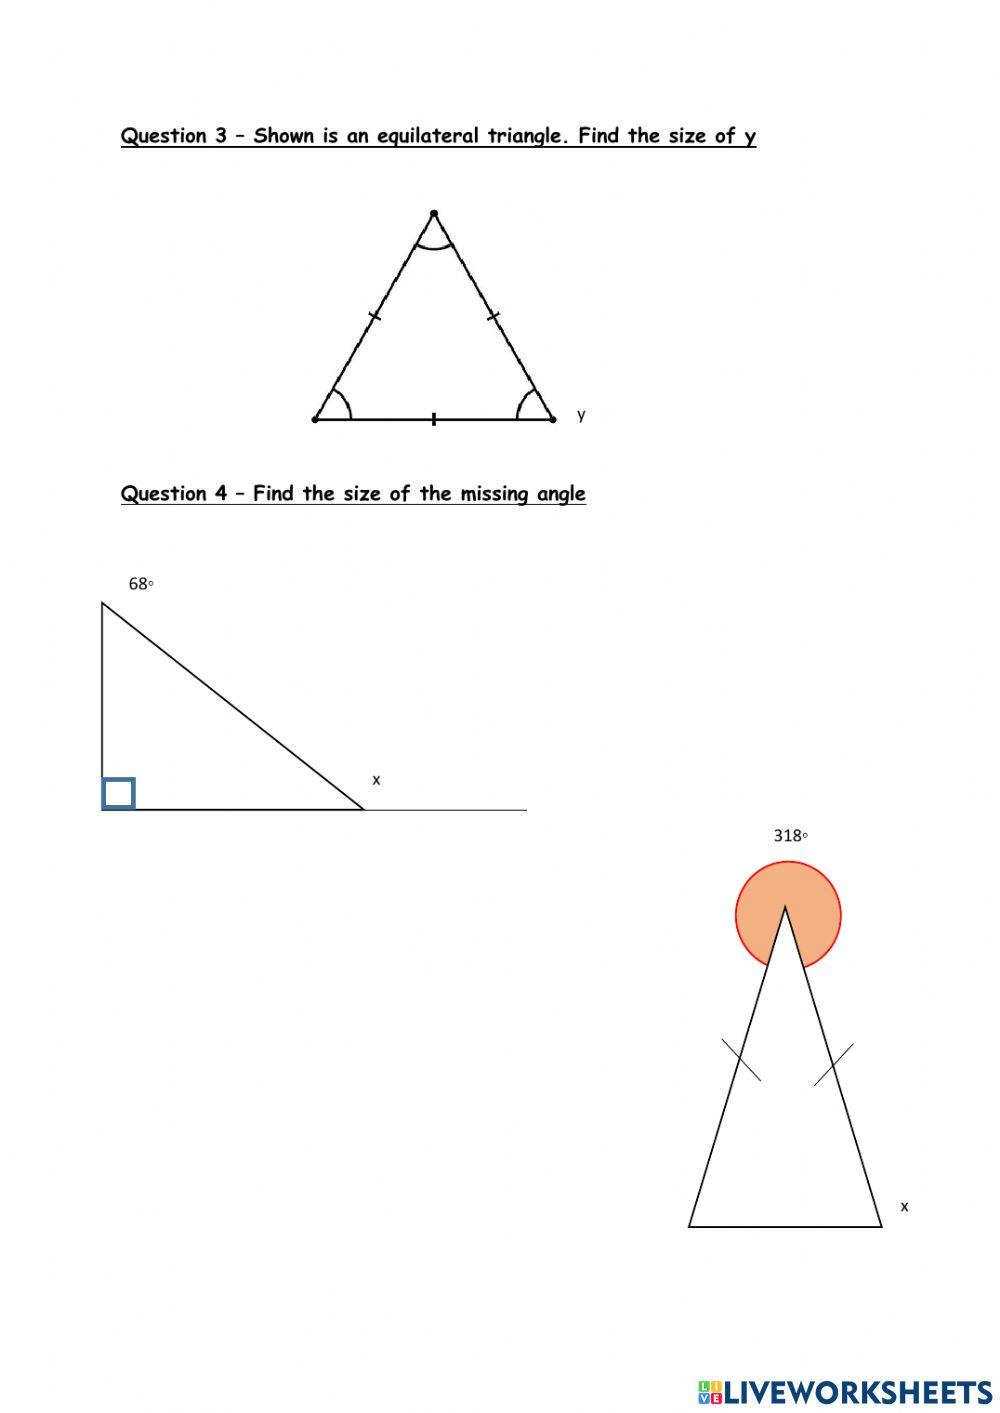 Angles in a triangle